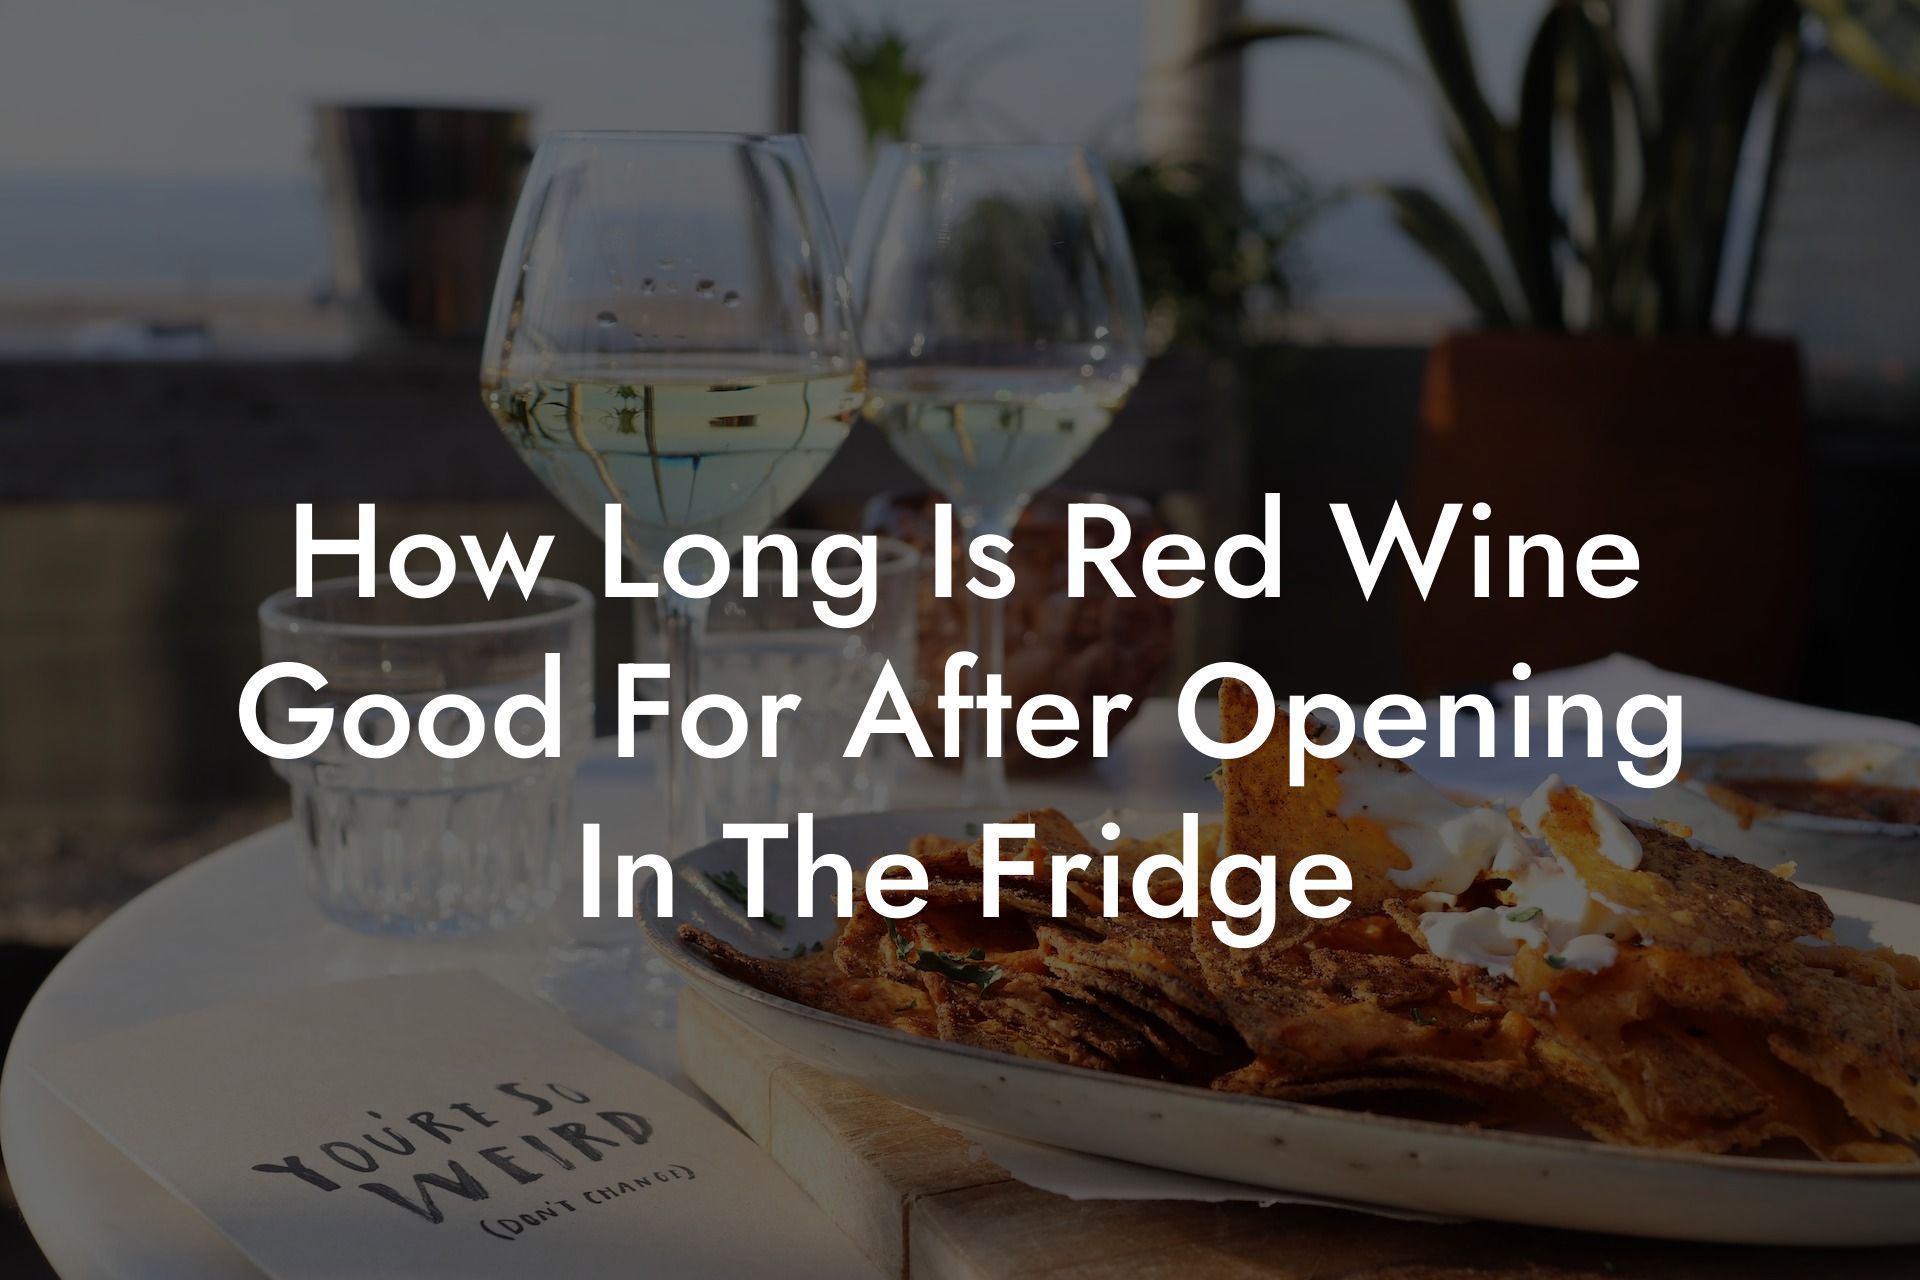 How Long Is Red Wine Good For After Opening In The Fridge